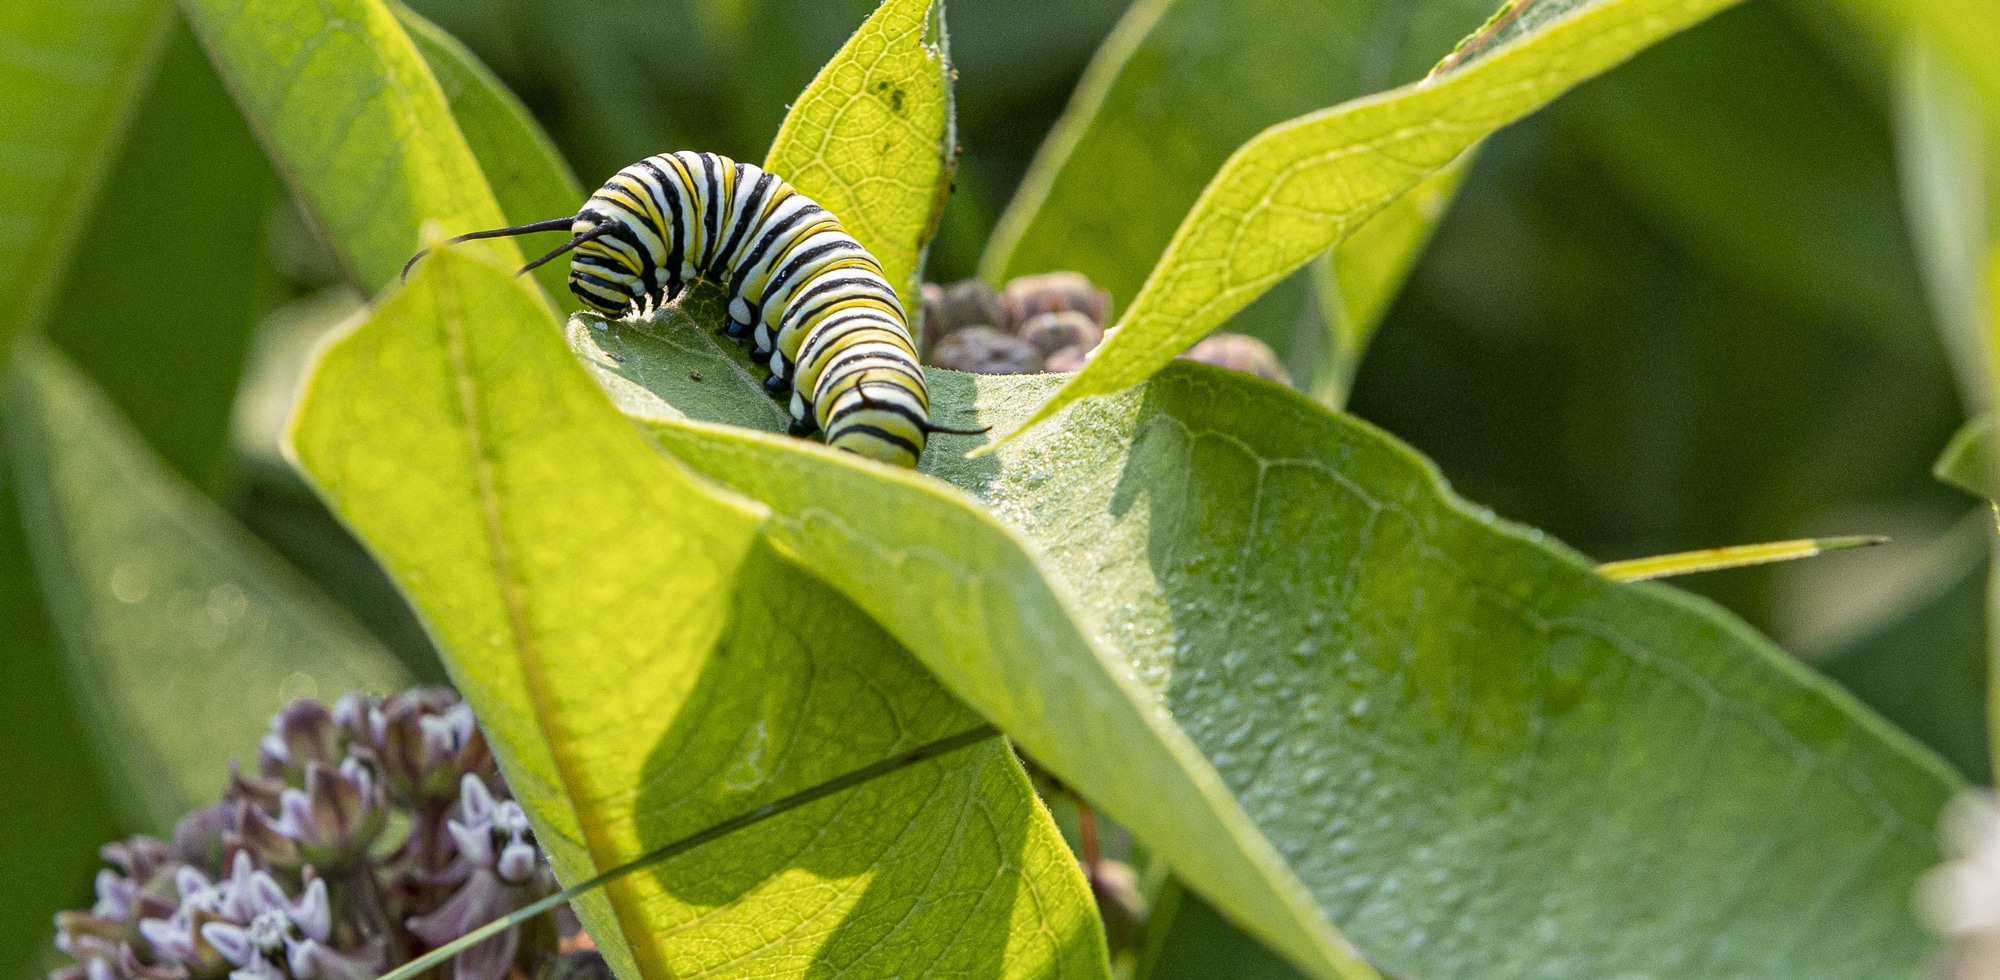 Bugs on Plant - Plants guarantee to flourish with Scott's Lawn Care